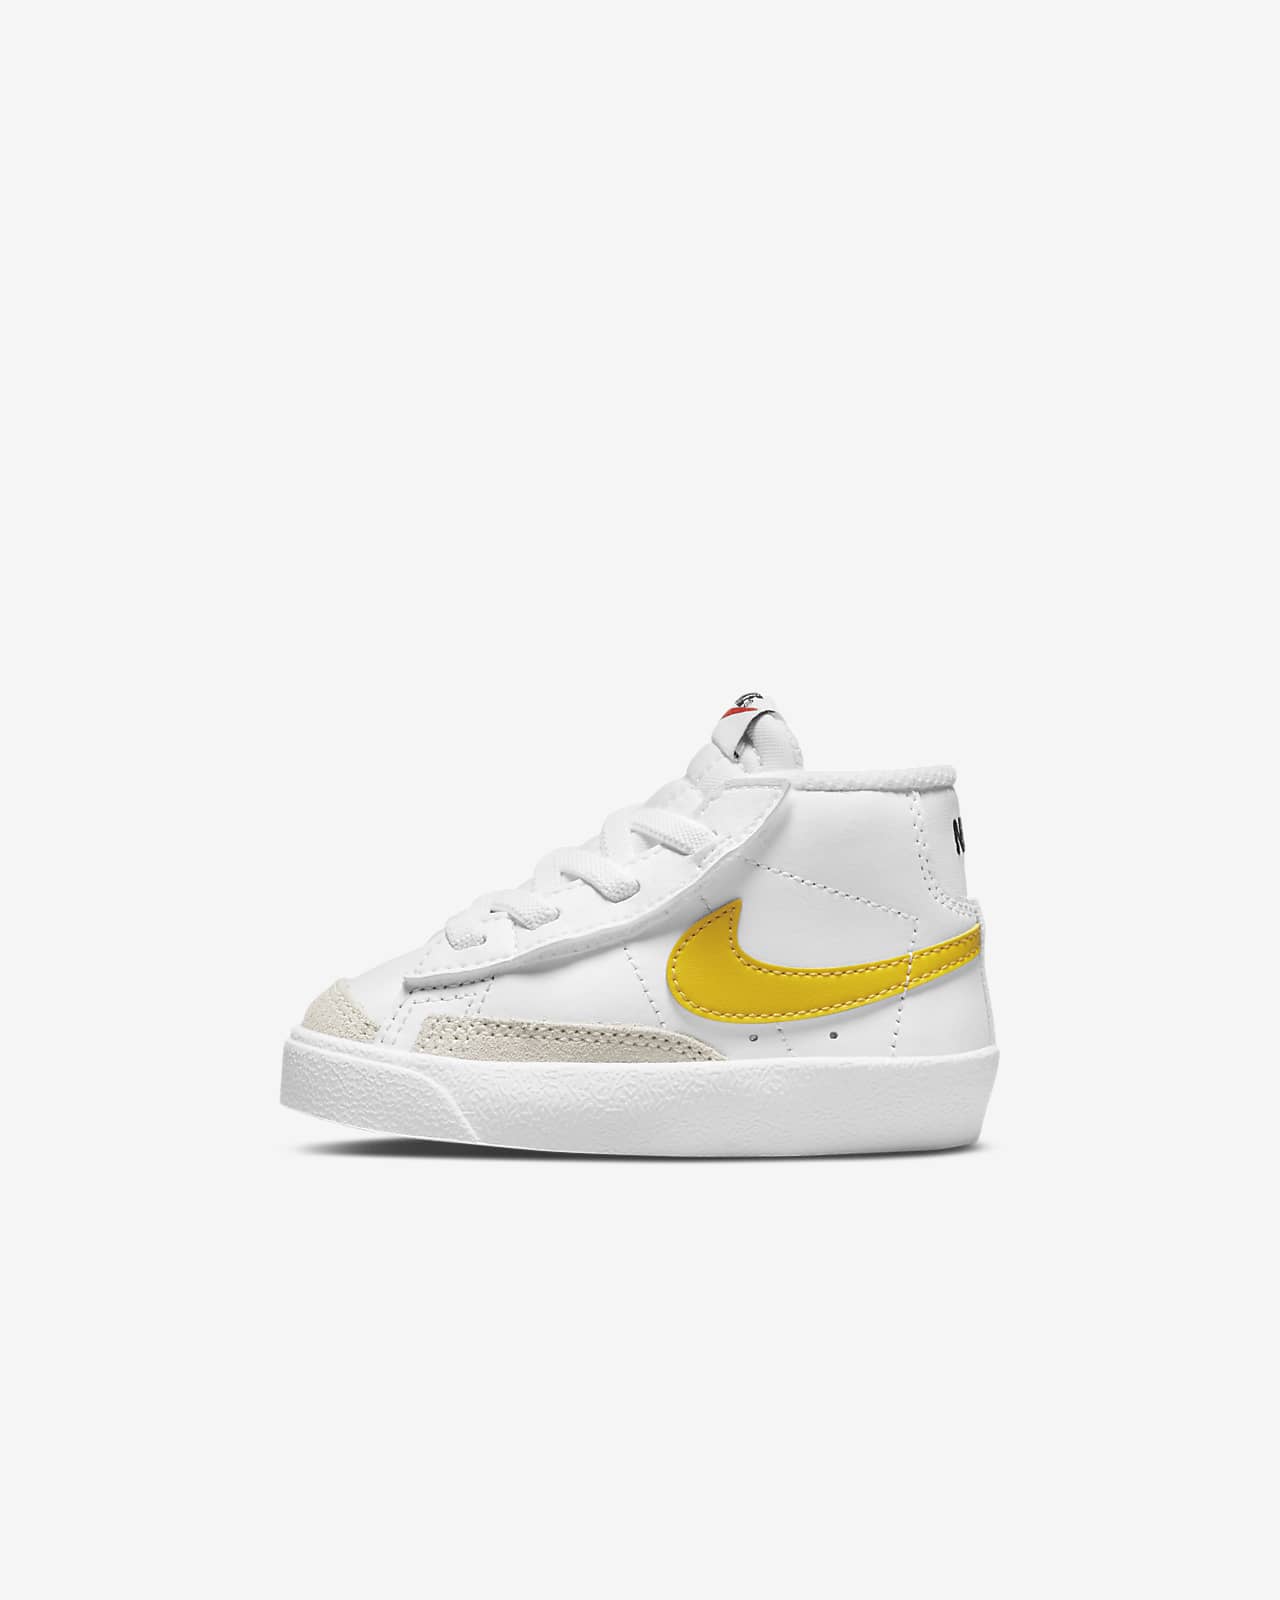 Nike Blazer Mid '77 Baby/Toddler Shoes